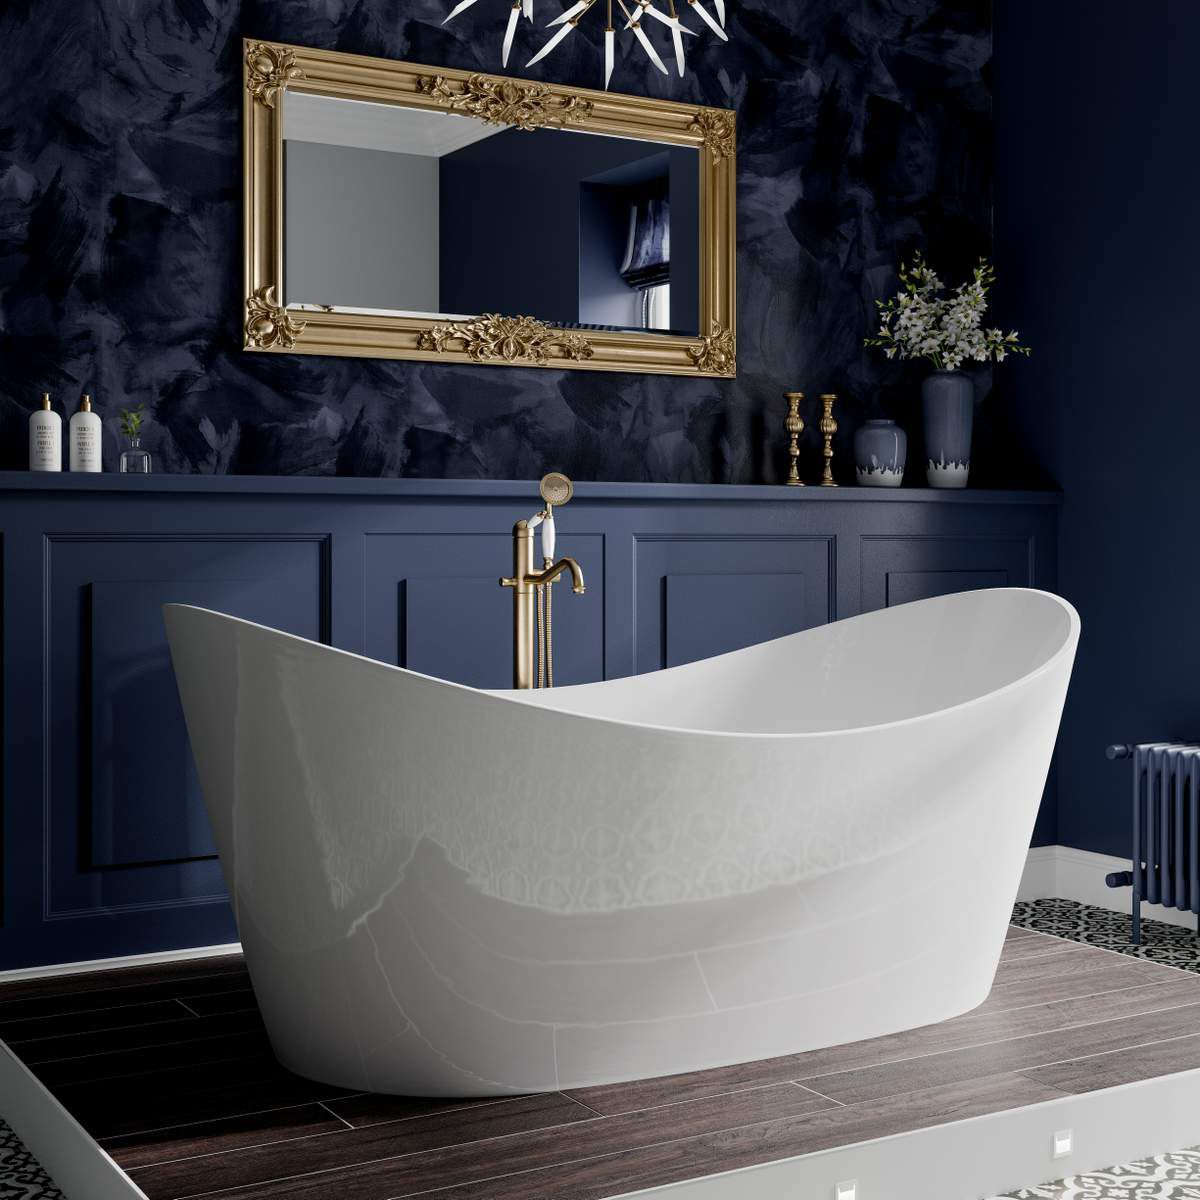 image example of a freestanding bath